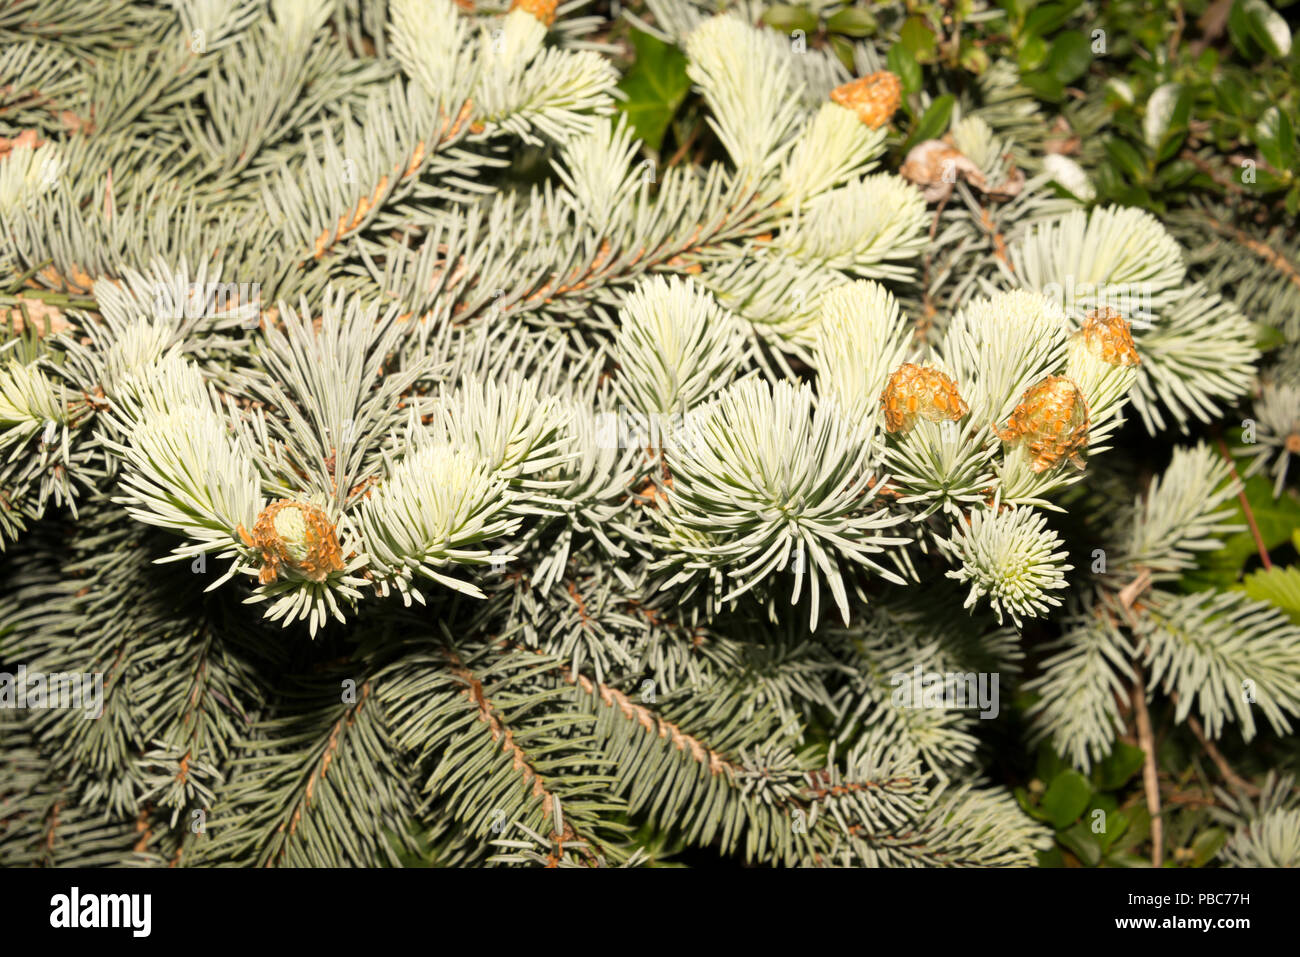 Colorado Spruce (Picea pungens) Stock Photo